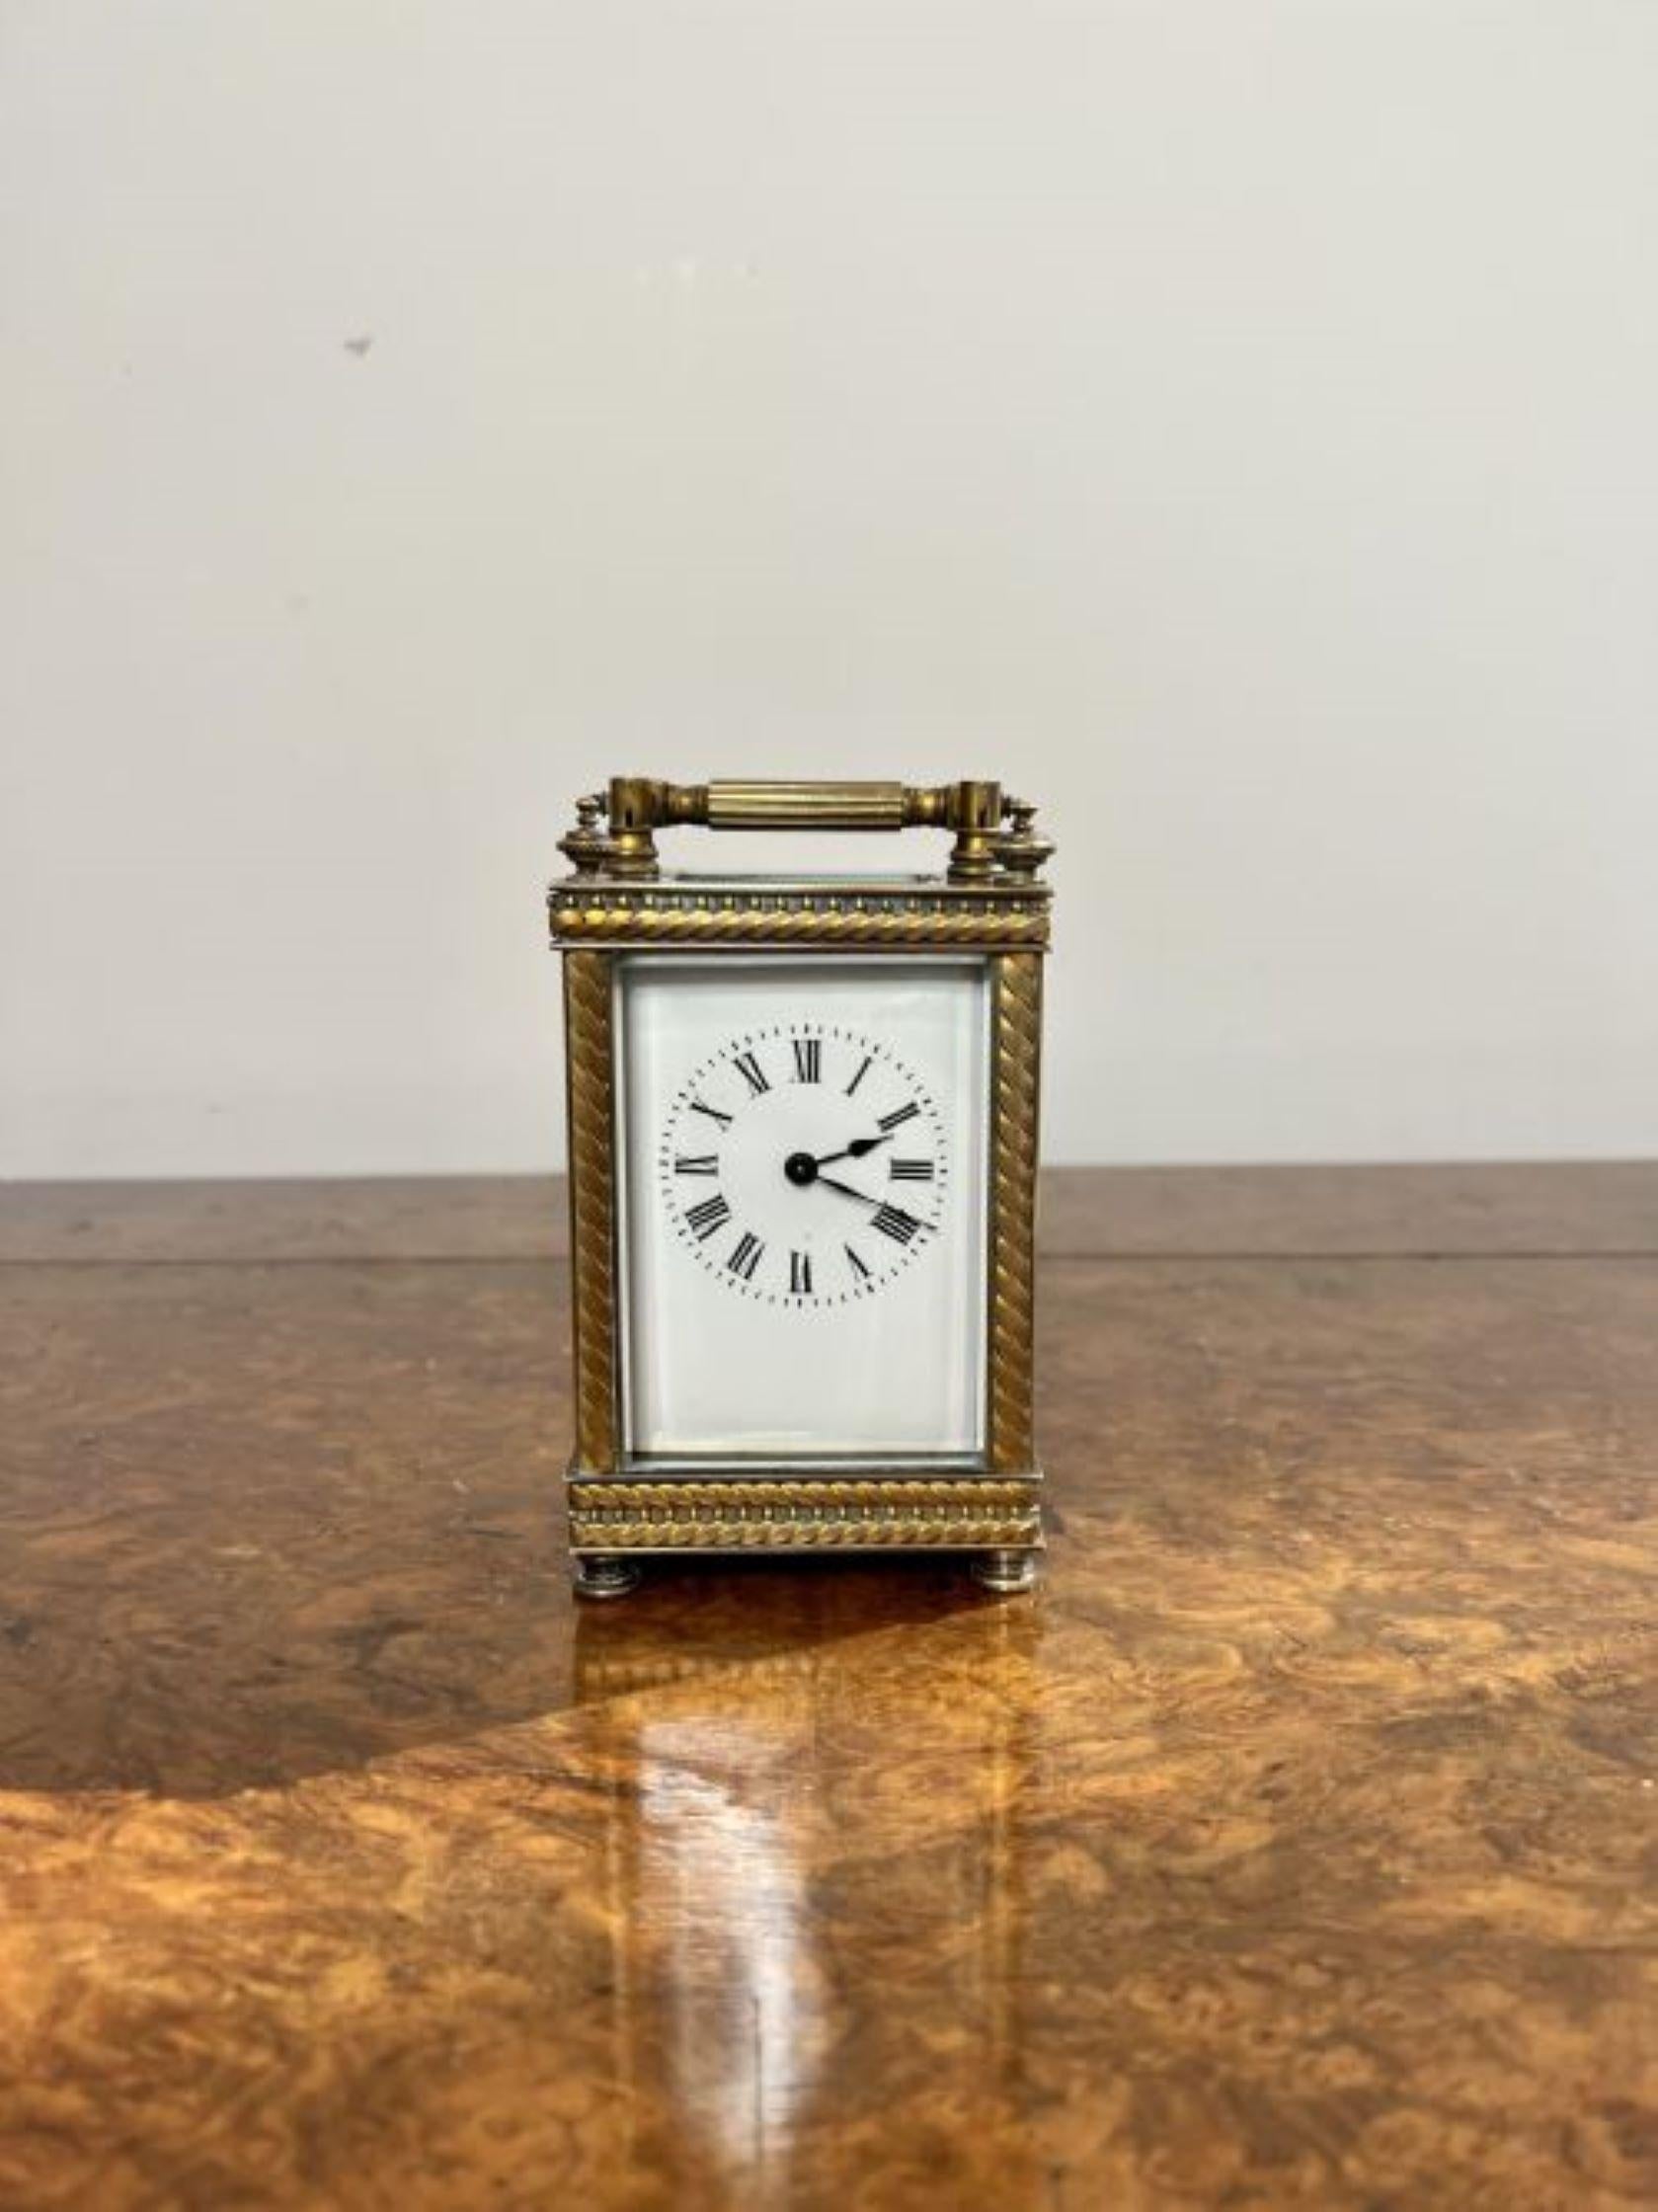 Fine quality antique Victorian brass carriage clock having a fine quality Victorian carriage clock with an eight day French movemenT, a rope twist brass case with a bevelled edge and glass panels.
Please note all of our clocks are serviced prior to